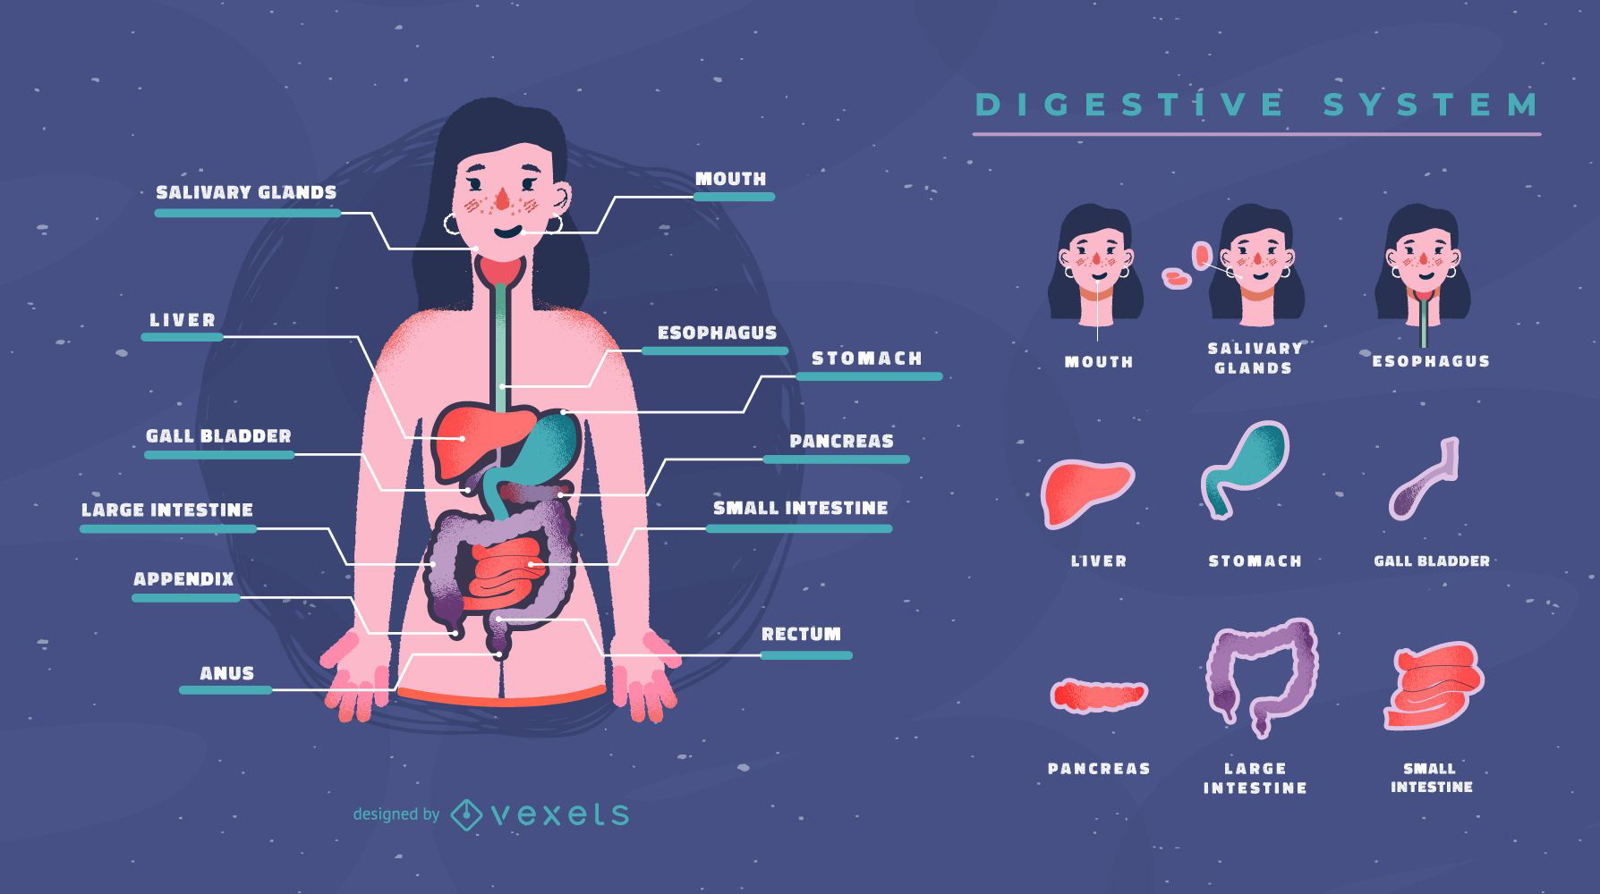 Digestive system infographic template